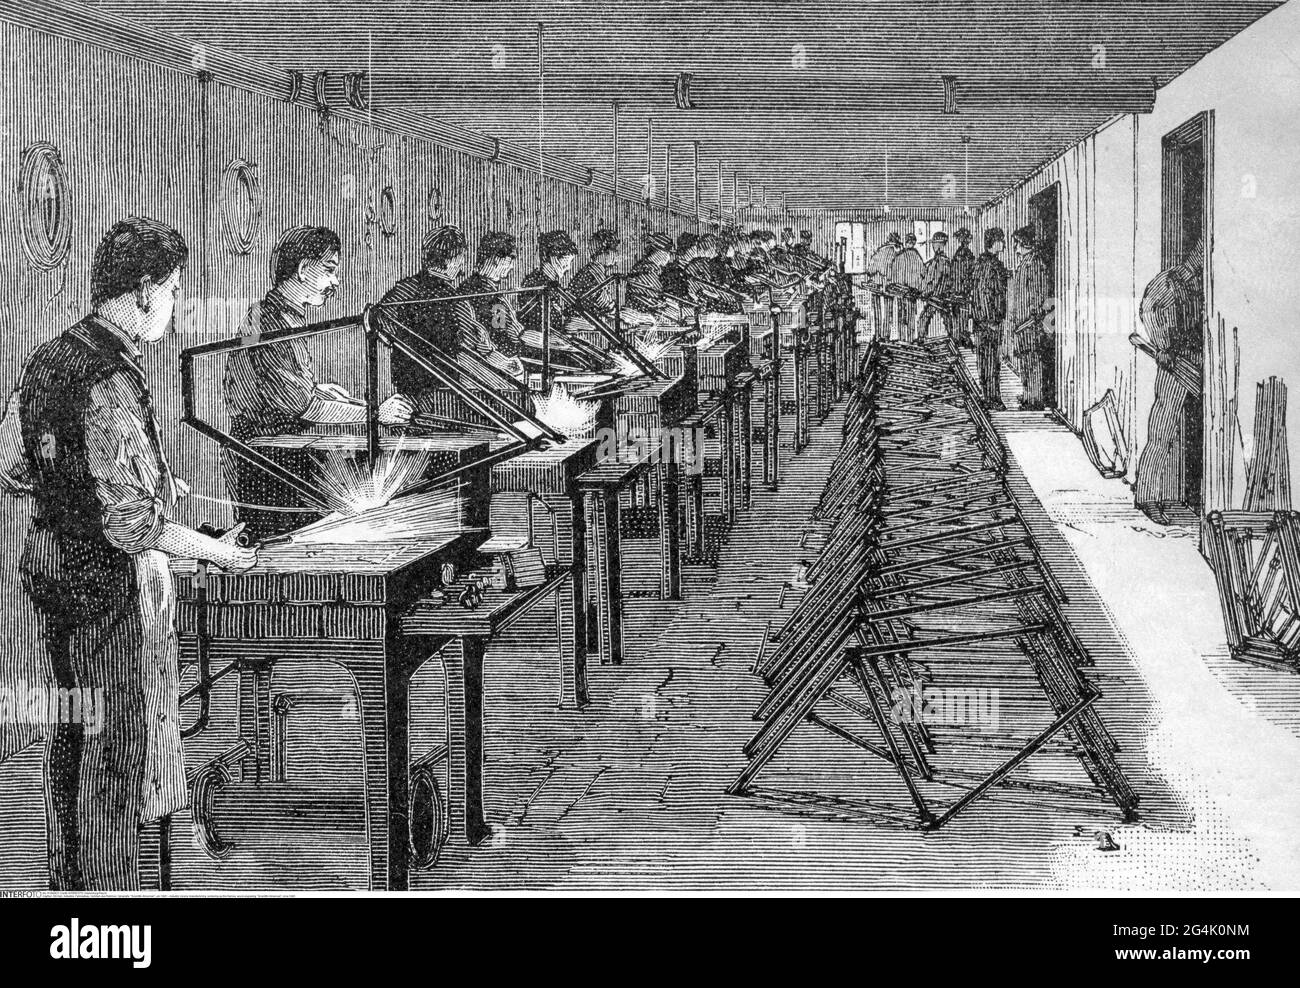 industry, bicycle manufactoring, soldering up the frames, wood engraving, 'Scientific American', circa 1895, ARTIST'S COPYRIGHT HAS NOT TO BE CLEARED Stock Photo